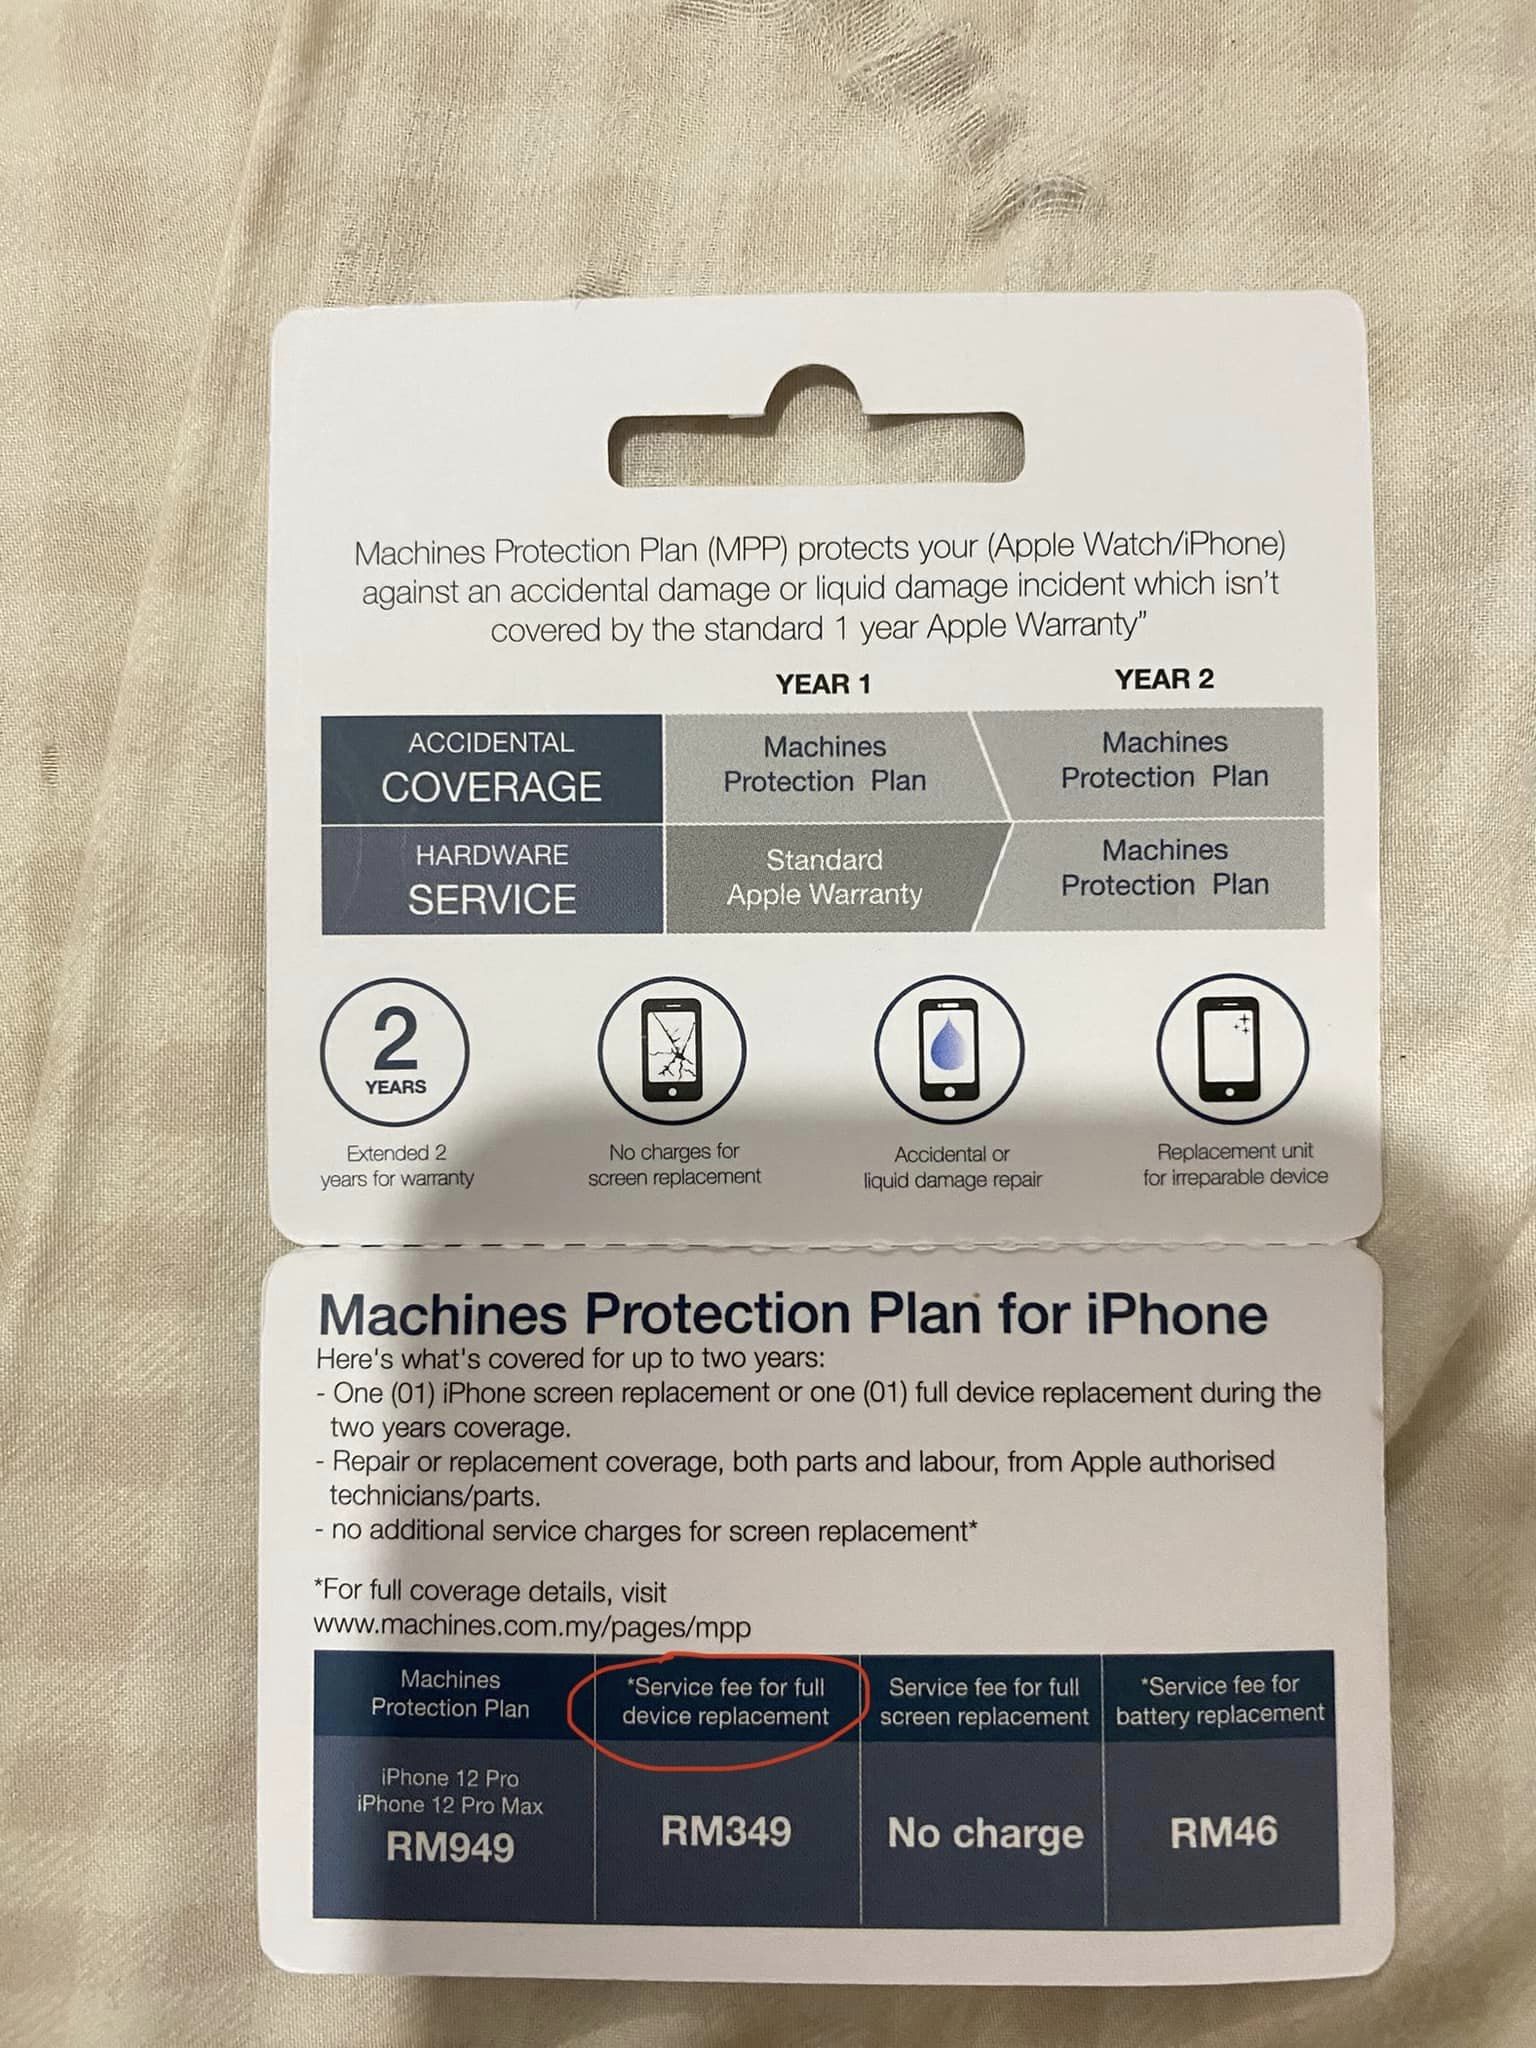 The protection plan offered by the reseller. Image credit: Kenny Ng